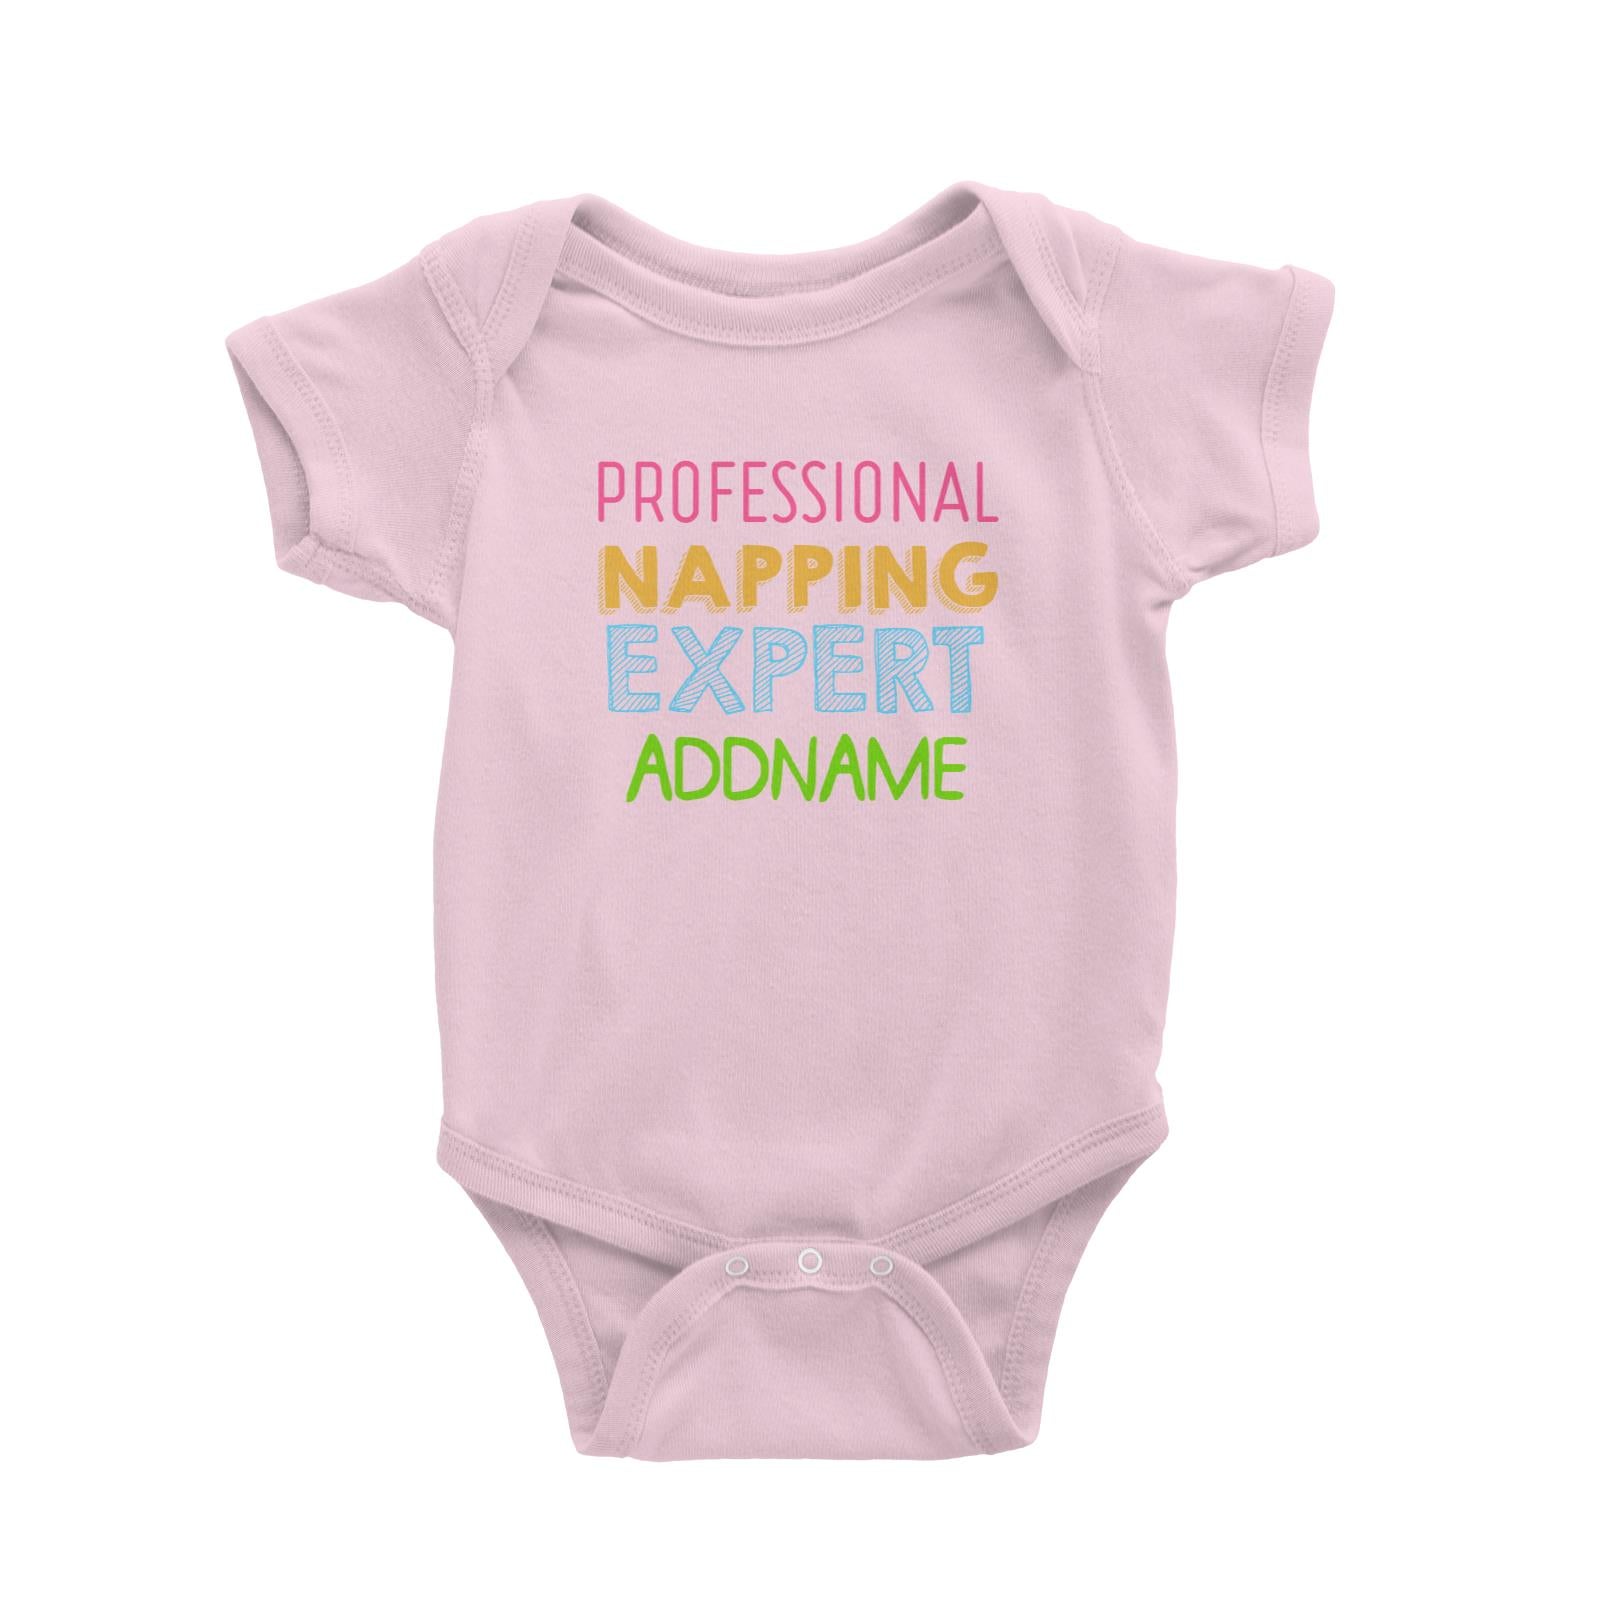 Professional Napping Expert Addname Baby Romper